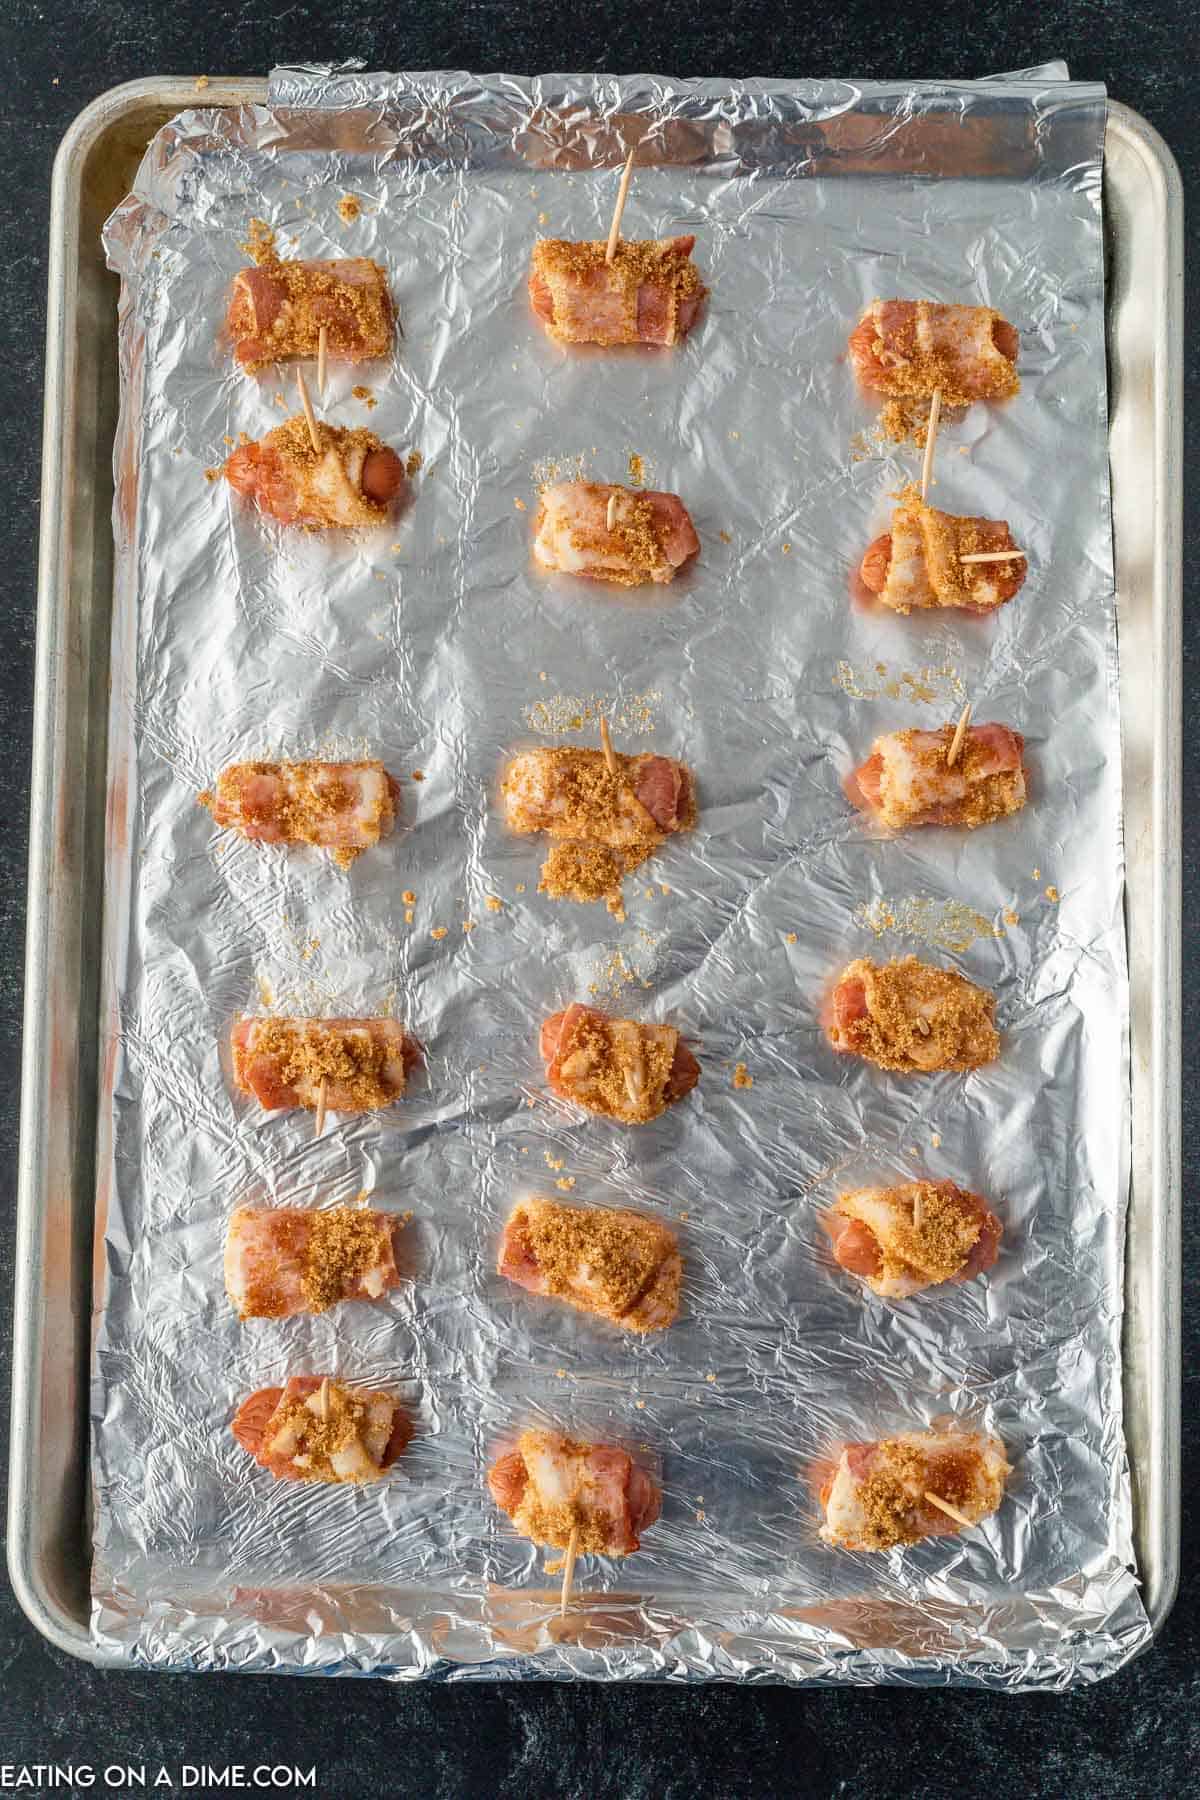 Placing bacon wrapped little smokies on a baking sheet